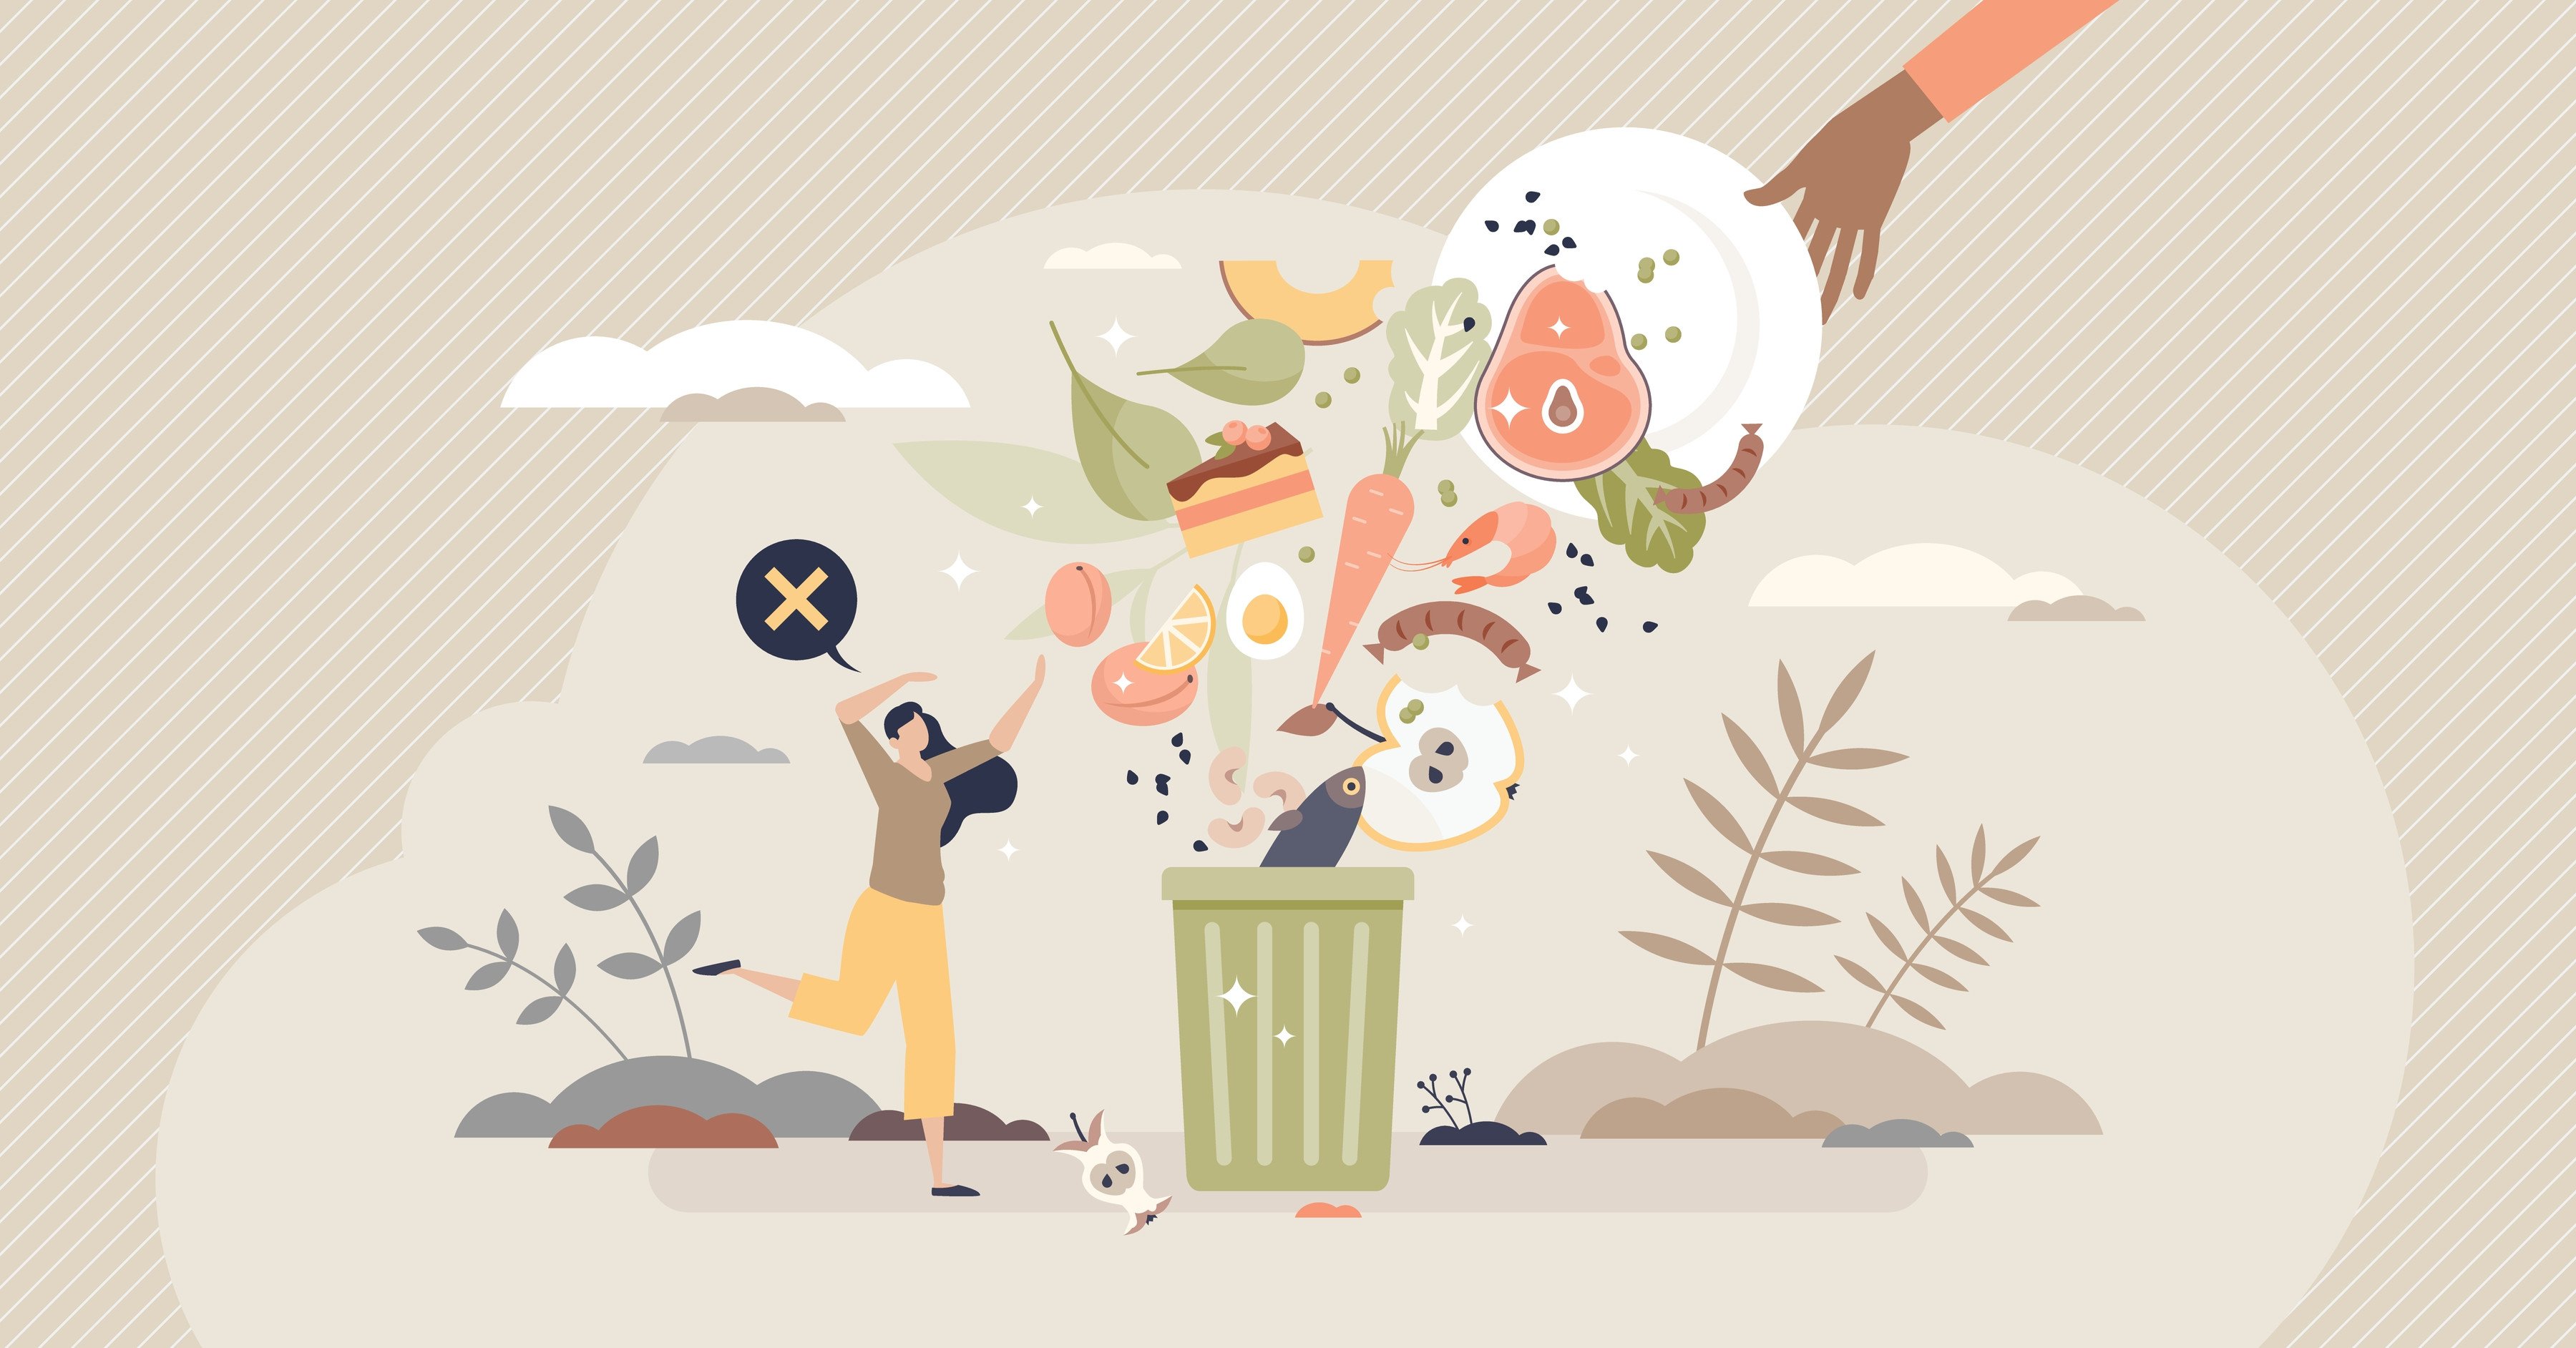 The Hong Kong government wants to encourage people to recycle their food waste scraps, but the guidelines about what can be recycled remain unclear. Photo: Shutterstock